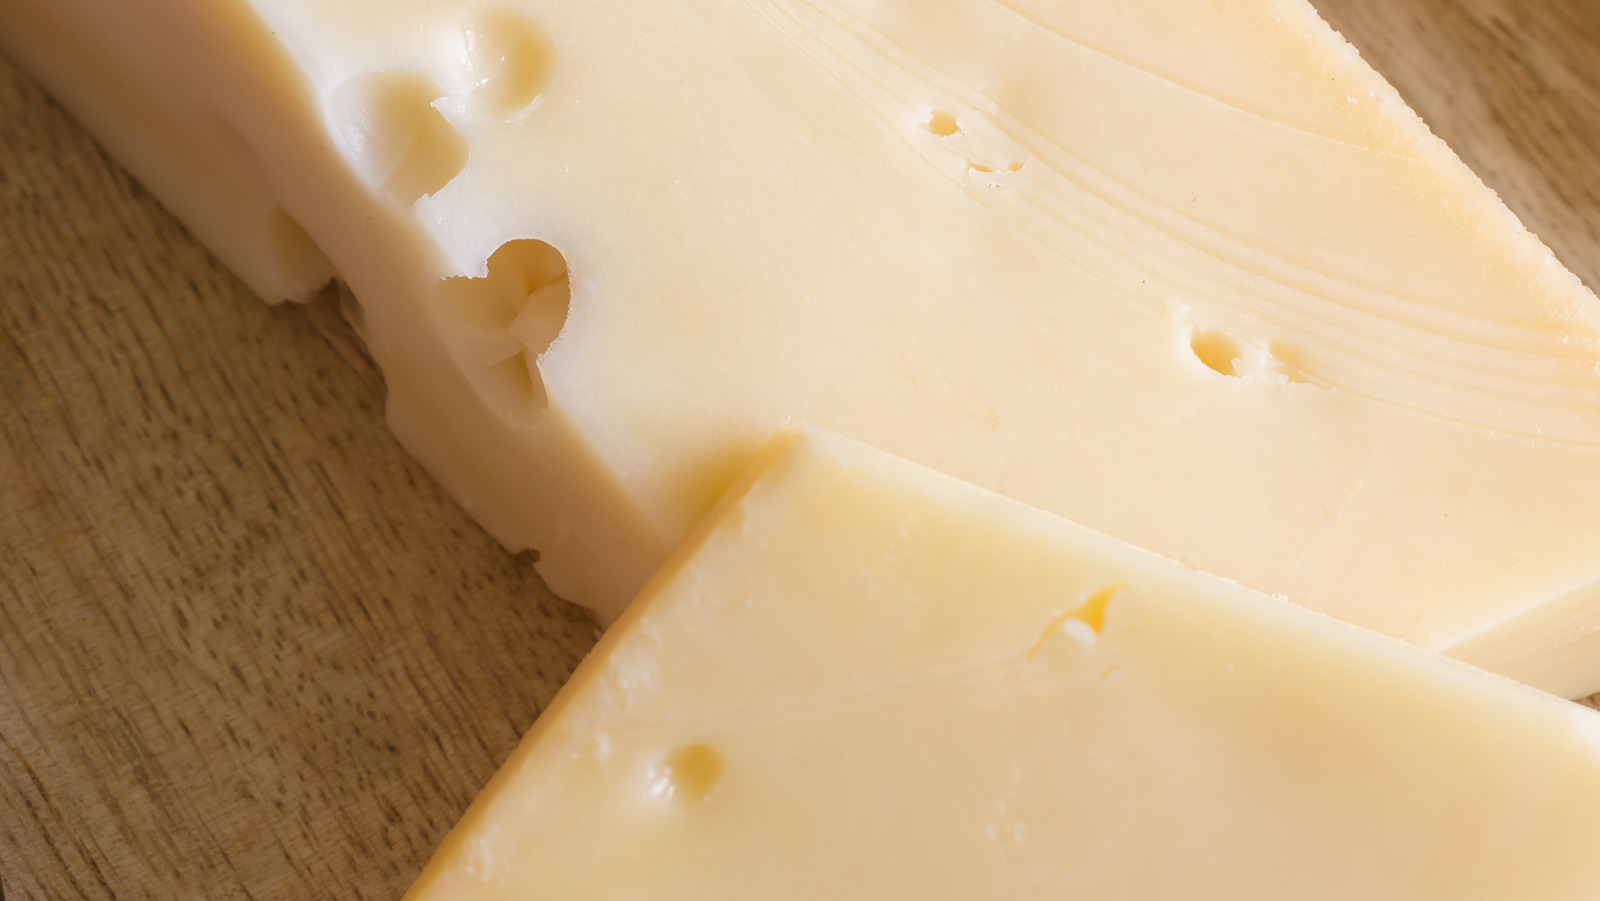 The Norwegian cheese that’s really good for you